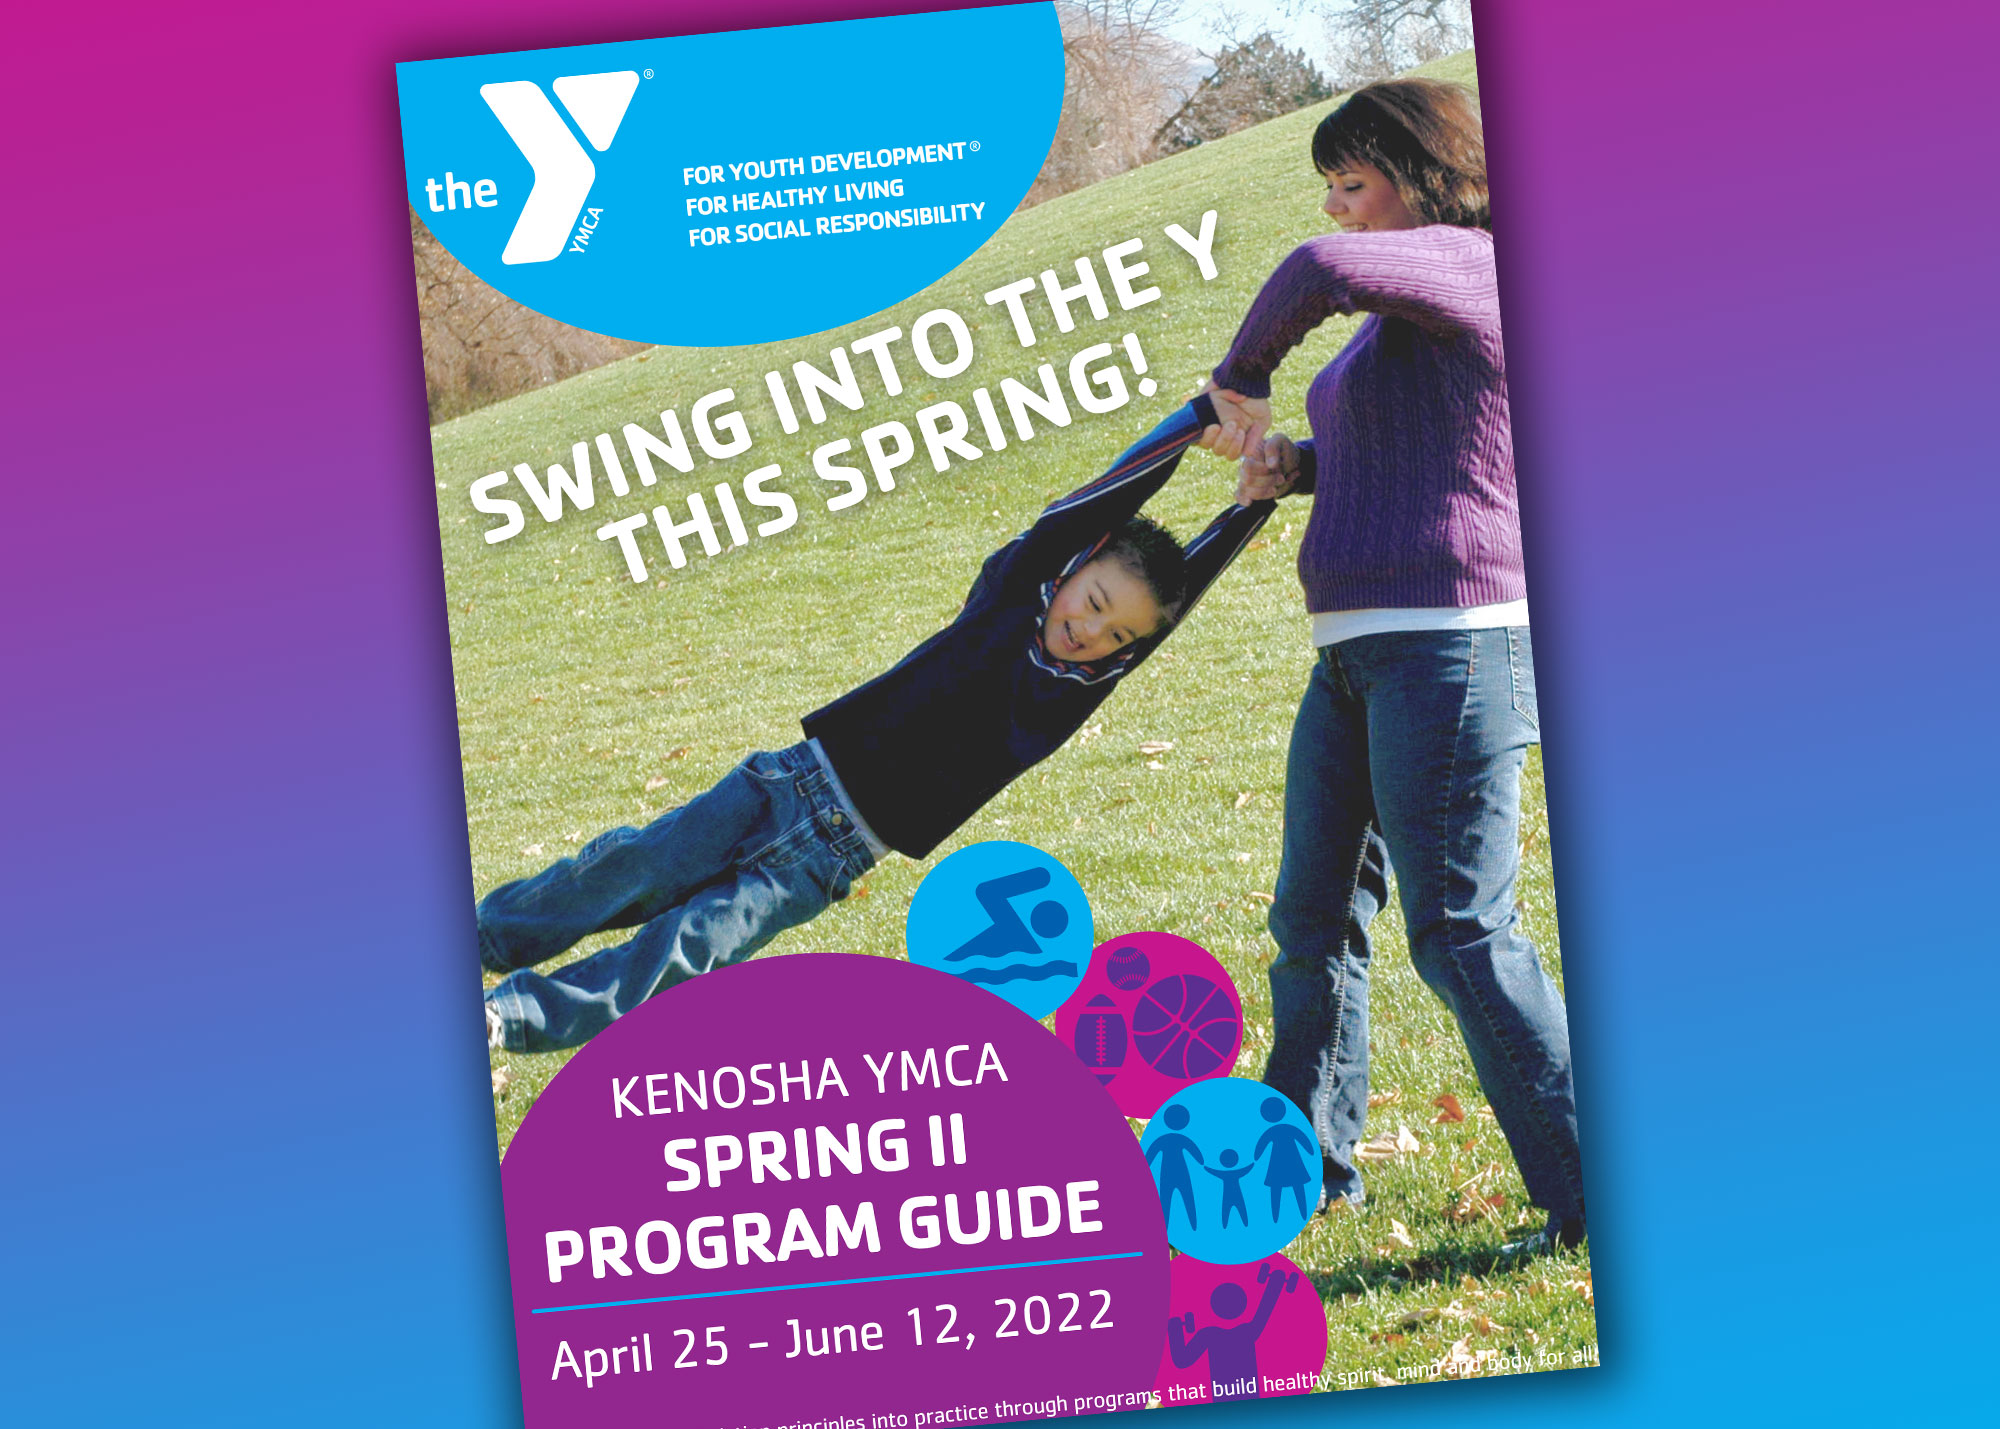 Click to View Upcoming Spring II Program Guide